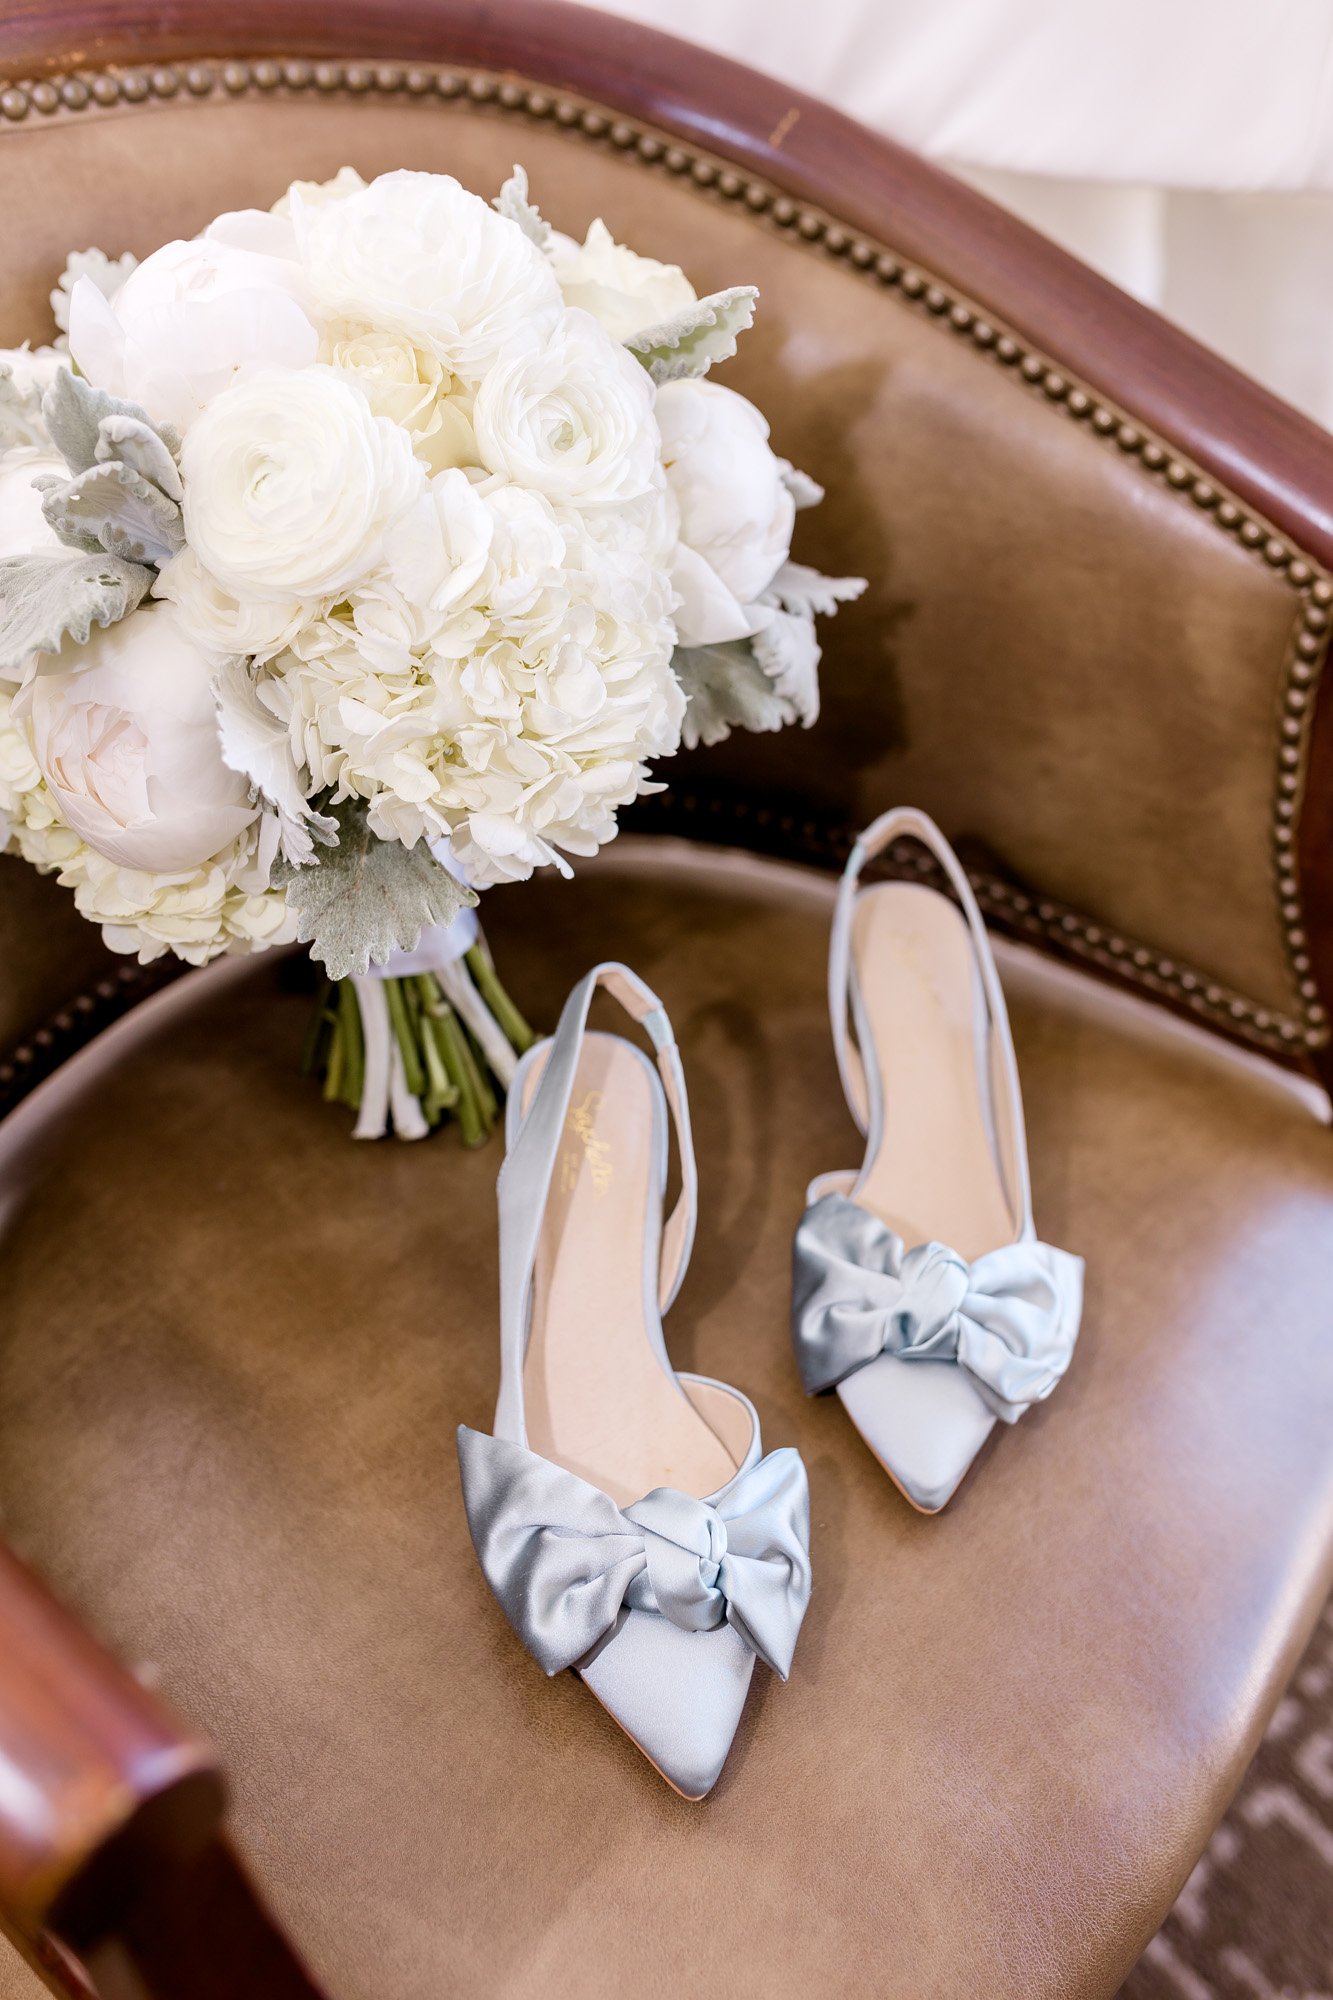  Classic bridal bouquet with white peonies, hydrangea, ranunculus, and lambs ear propped in a brown leather chair with silver bridal shoes with a pointed toe and large bow 